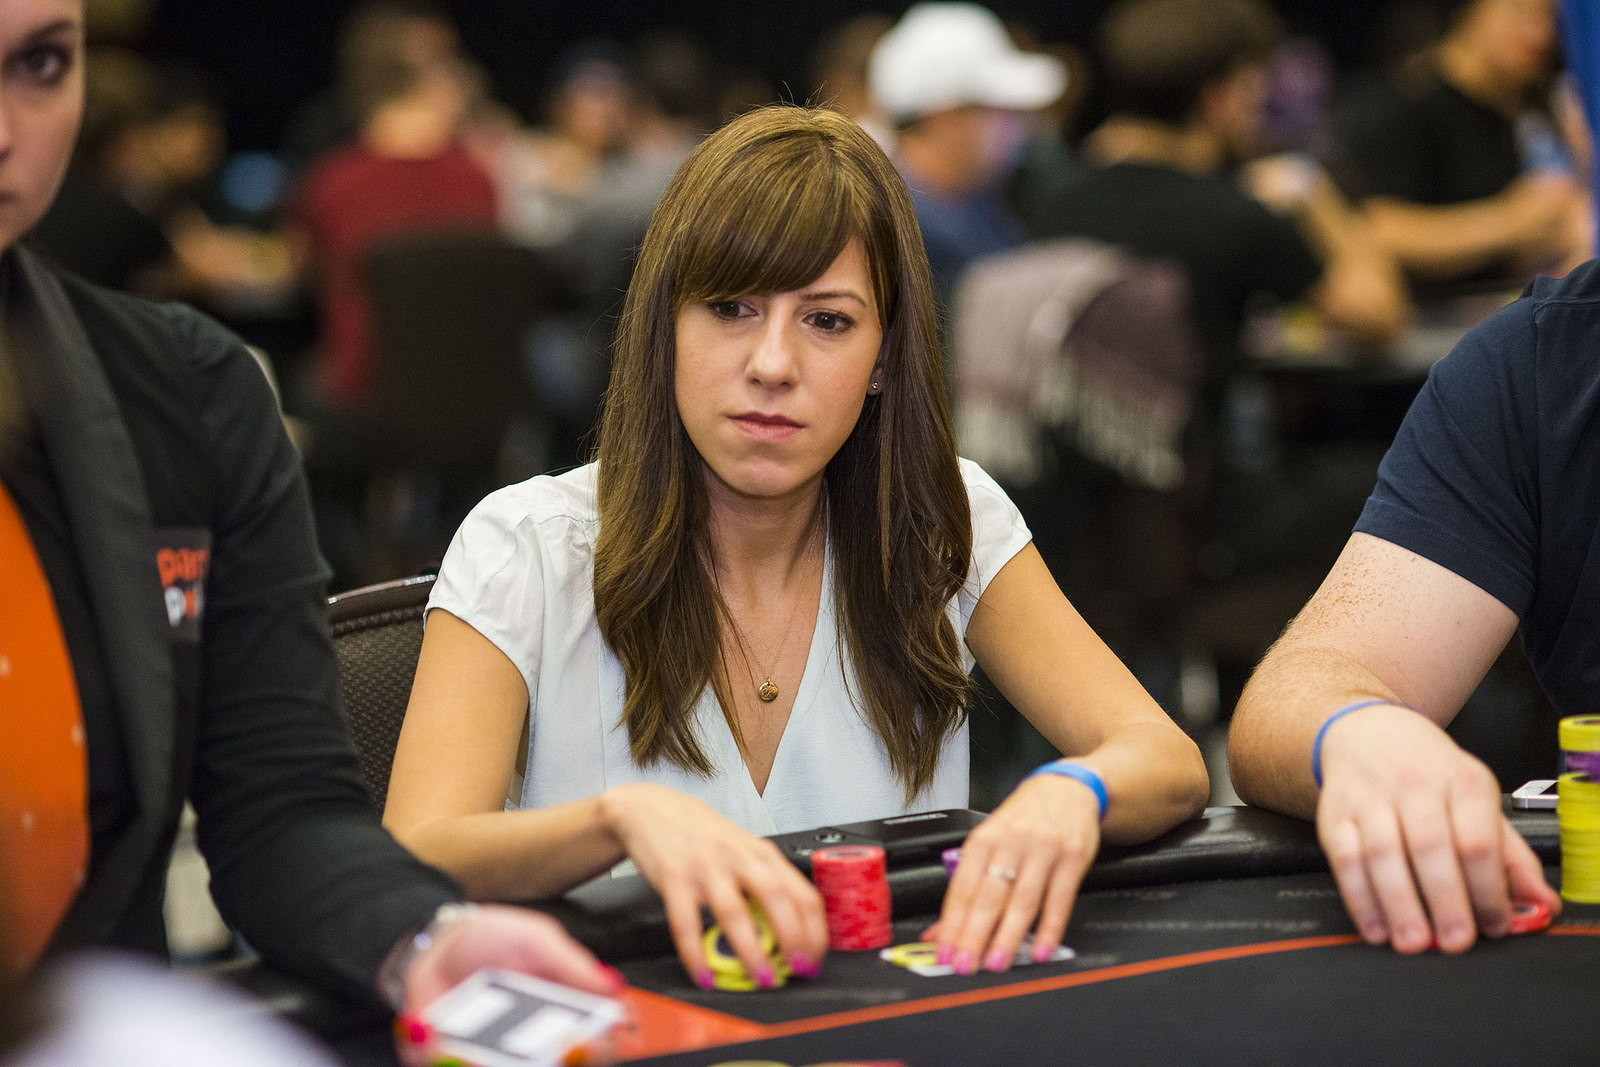 Partypoker Ladies Courts Players Through Special Tournaments, Social Media Channels